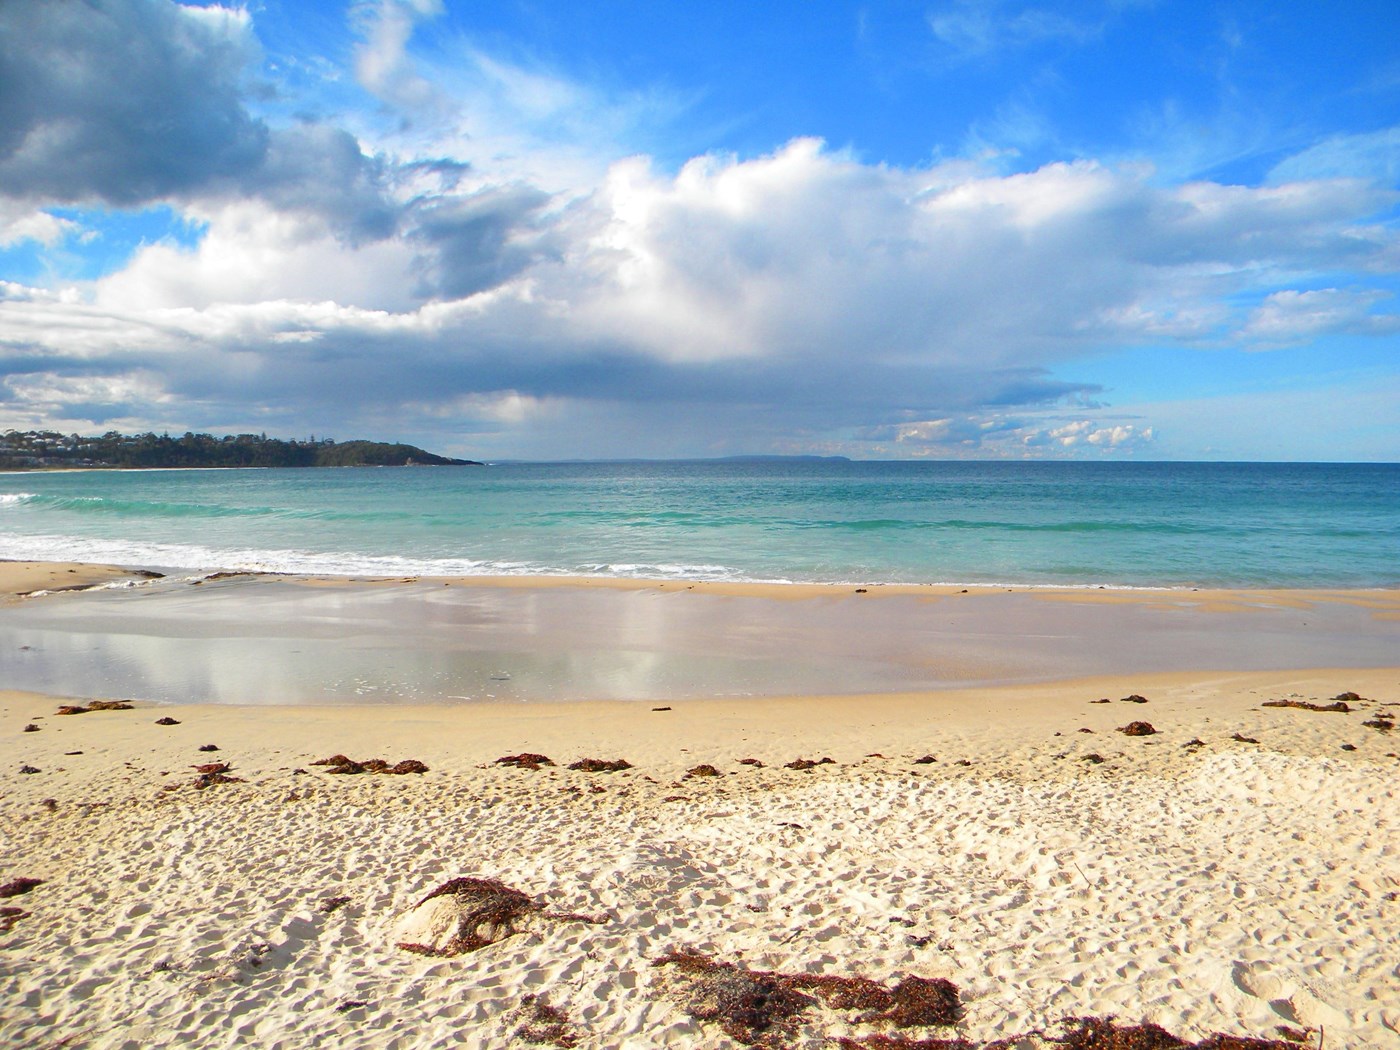 Pristine sand and turquoise water at Mollymook Beach NSW